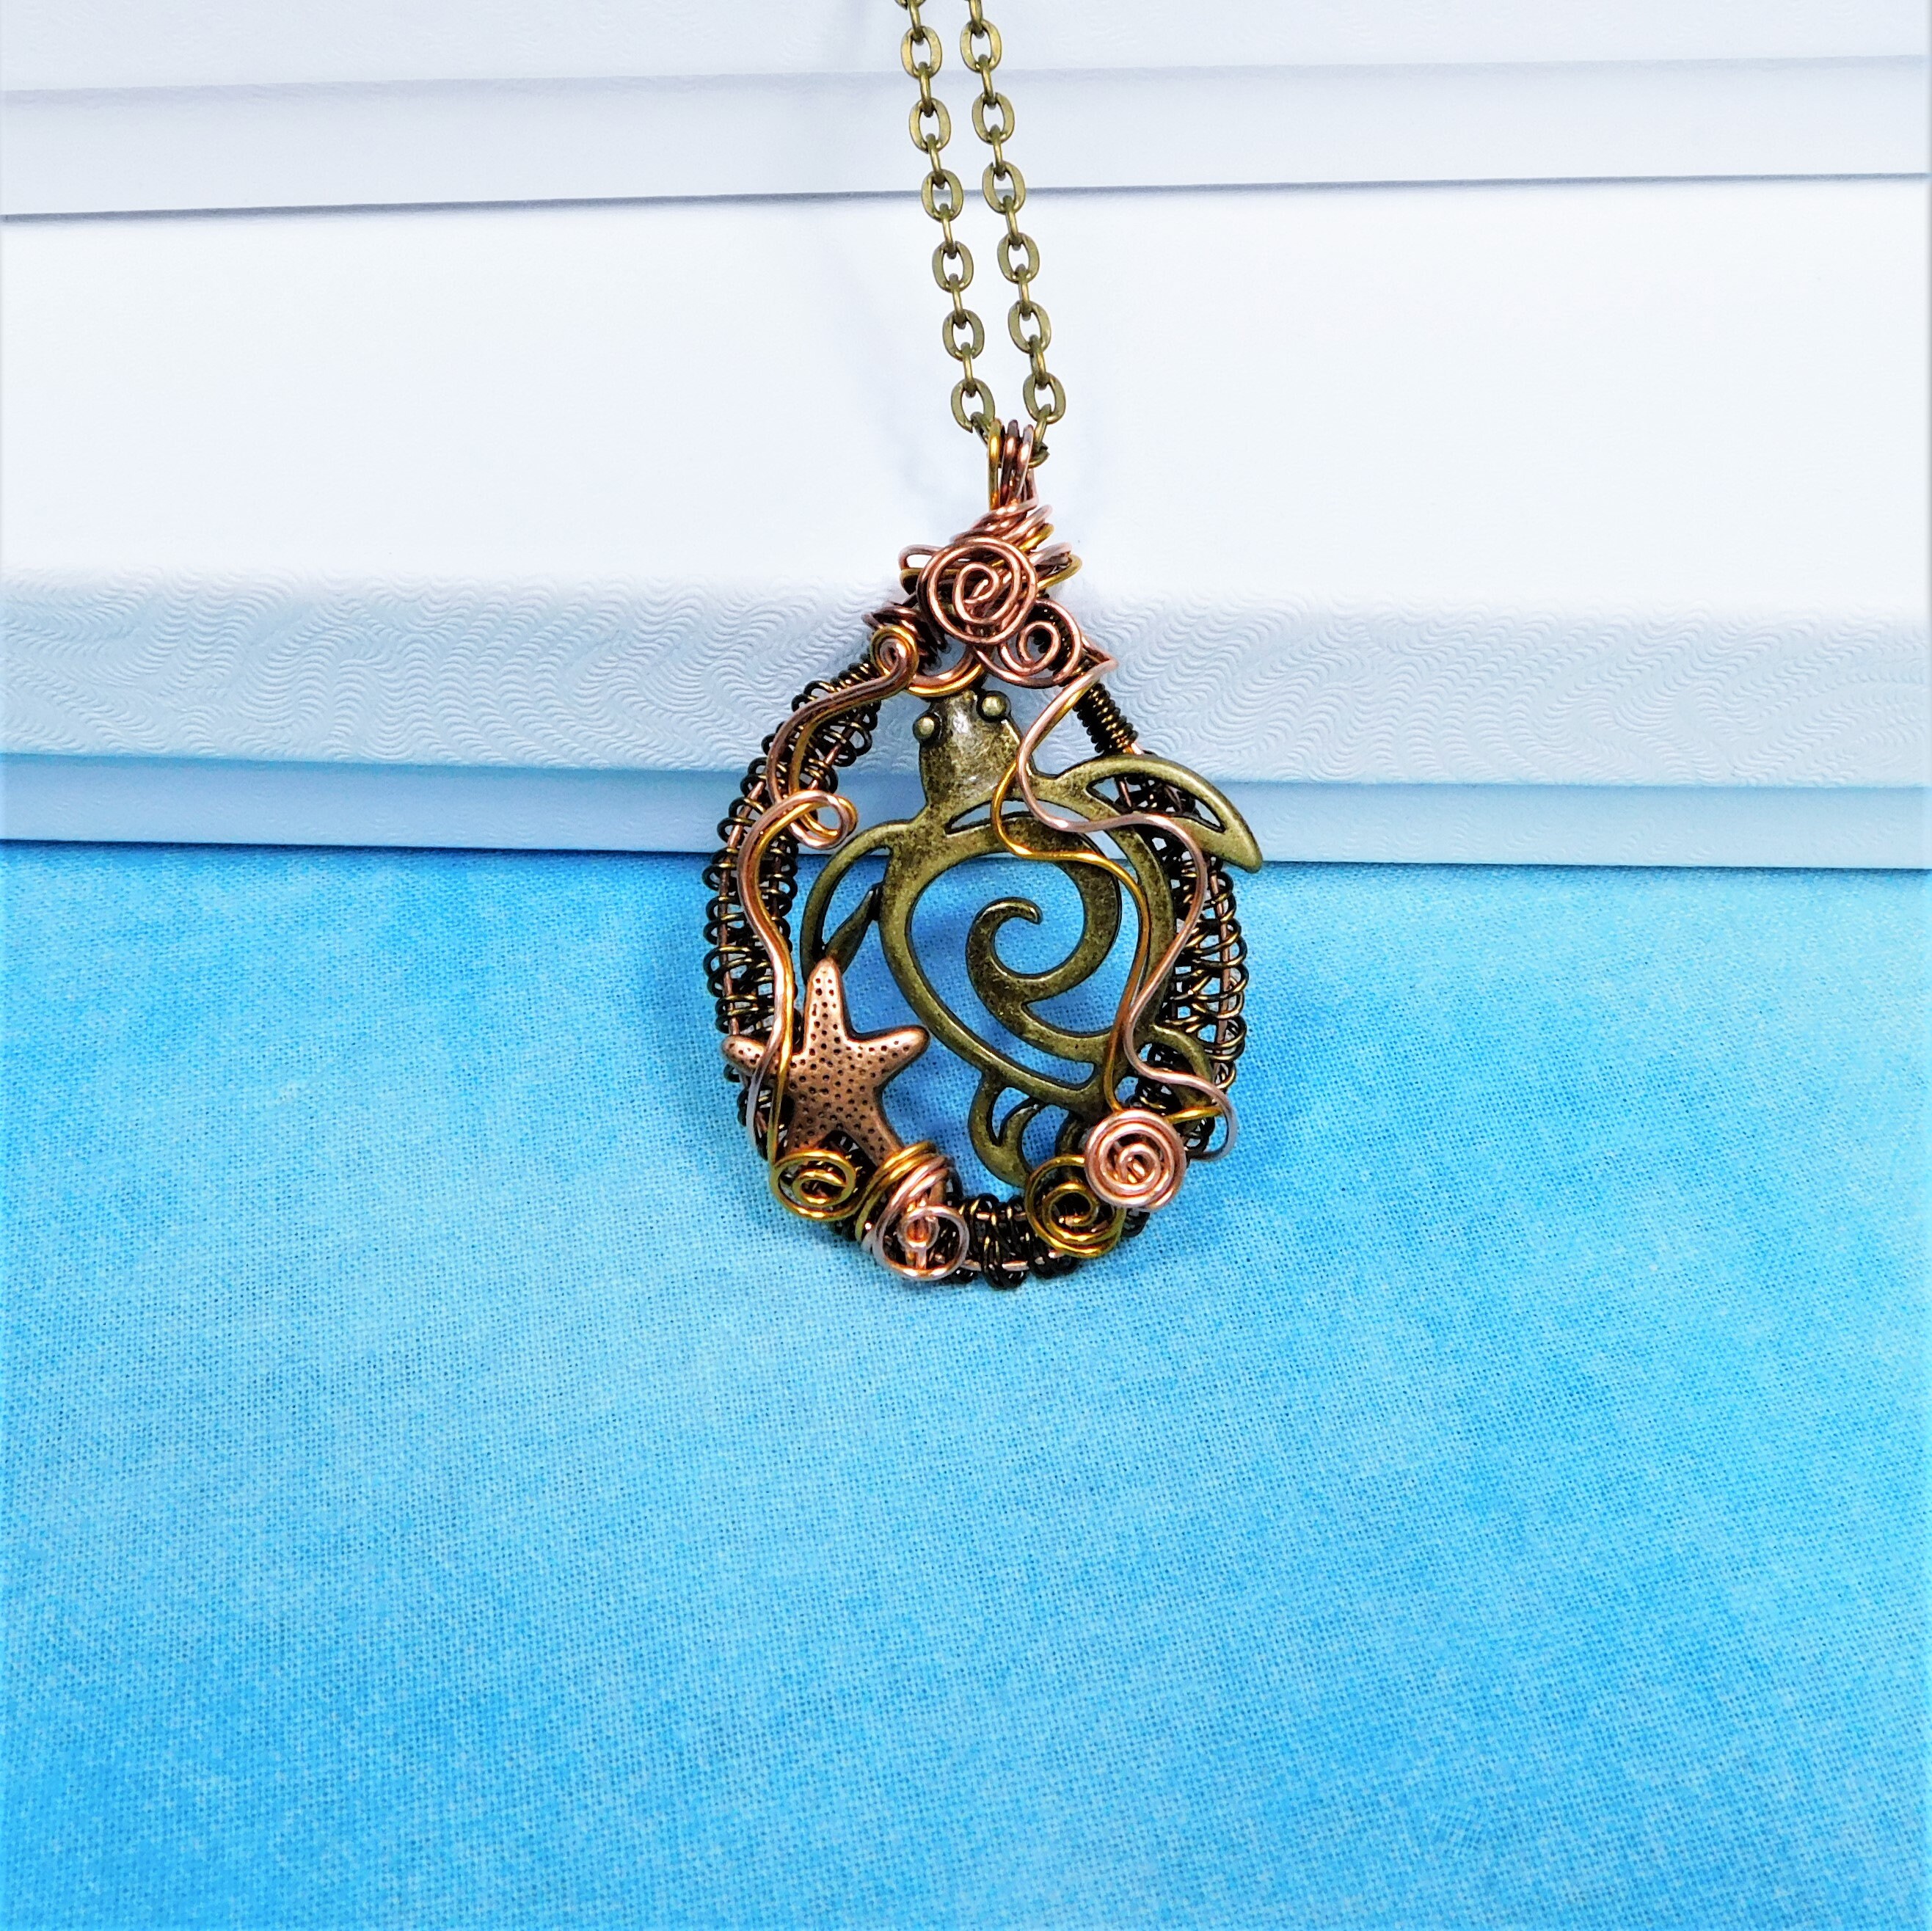 Woven Copper Sea Turtle Necklace, Artistic Handmade Wire Wrapped ...